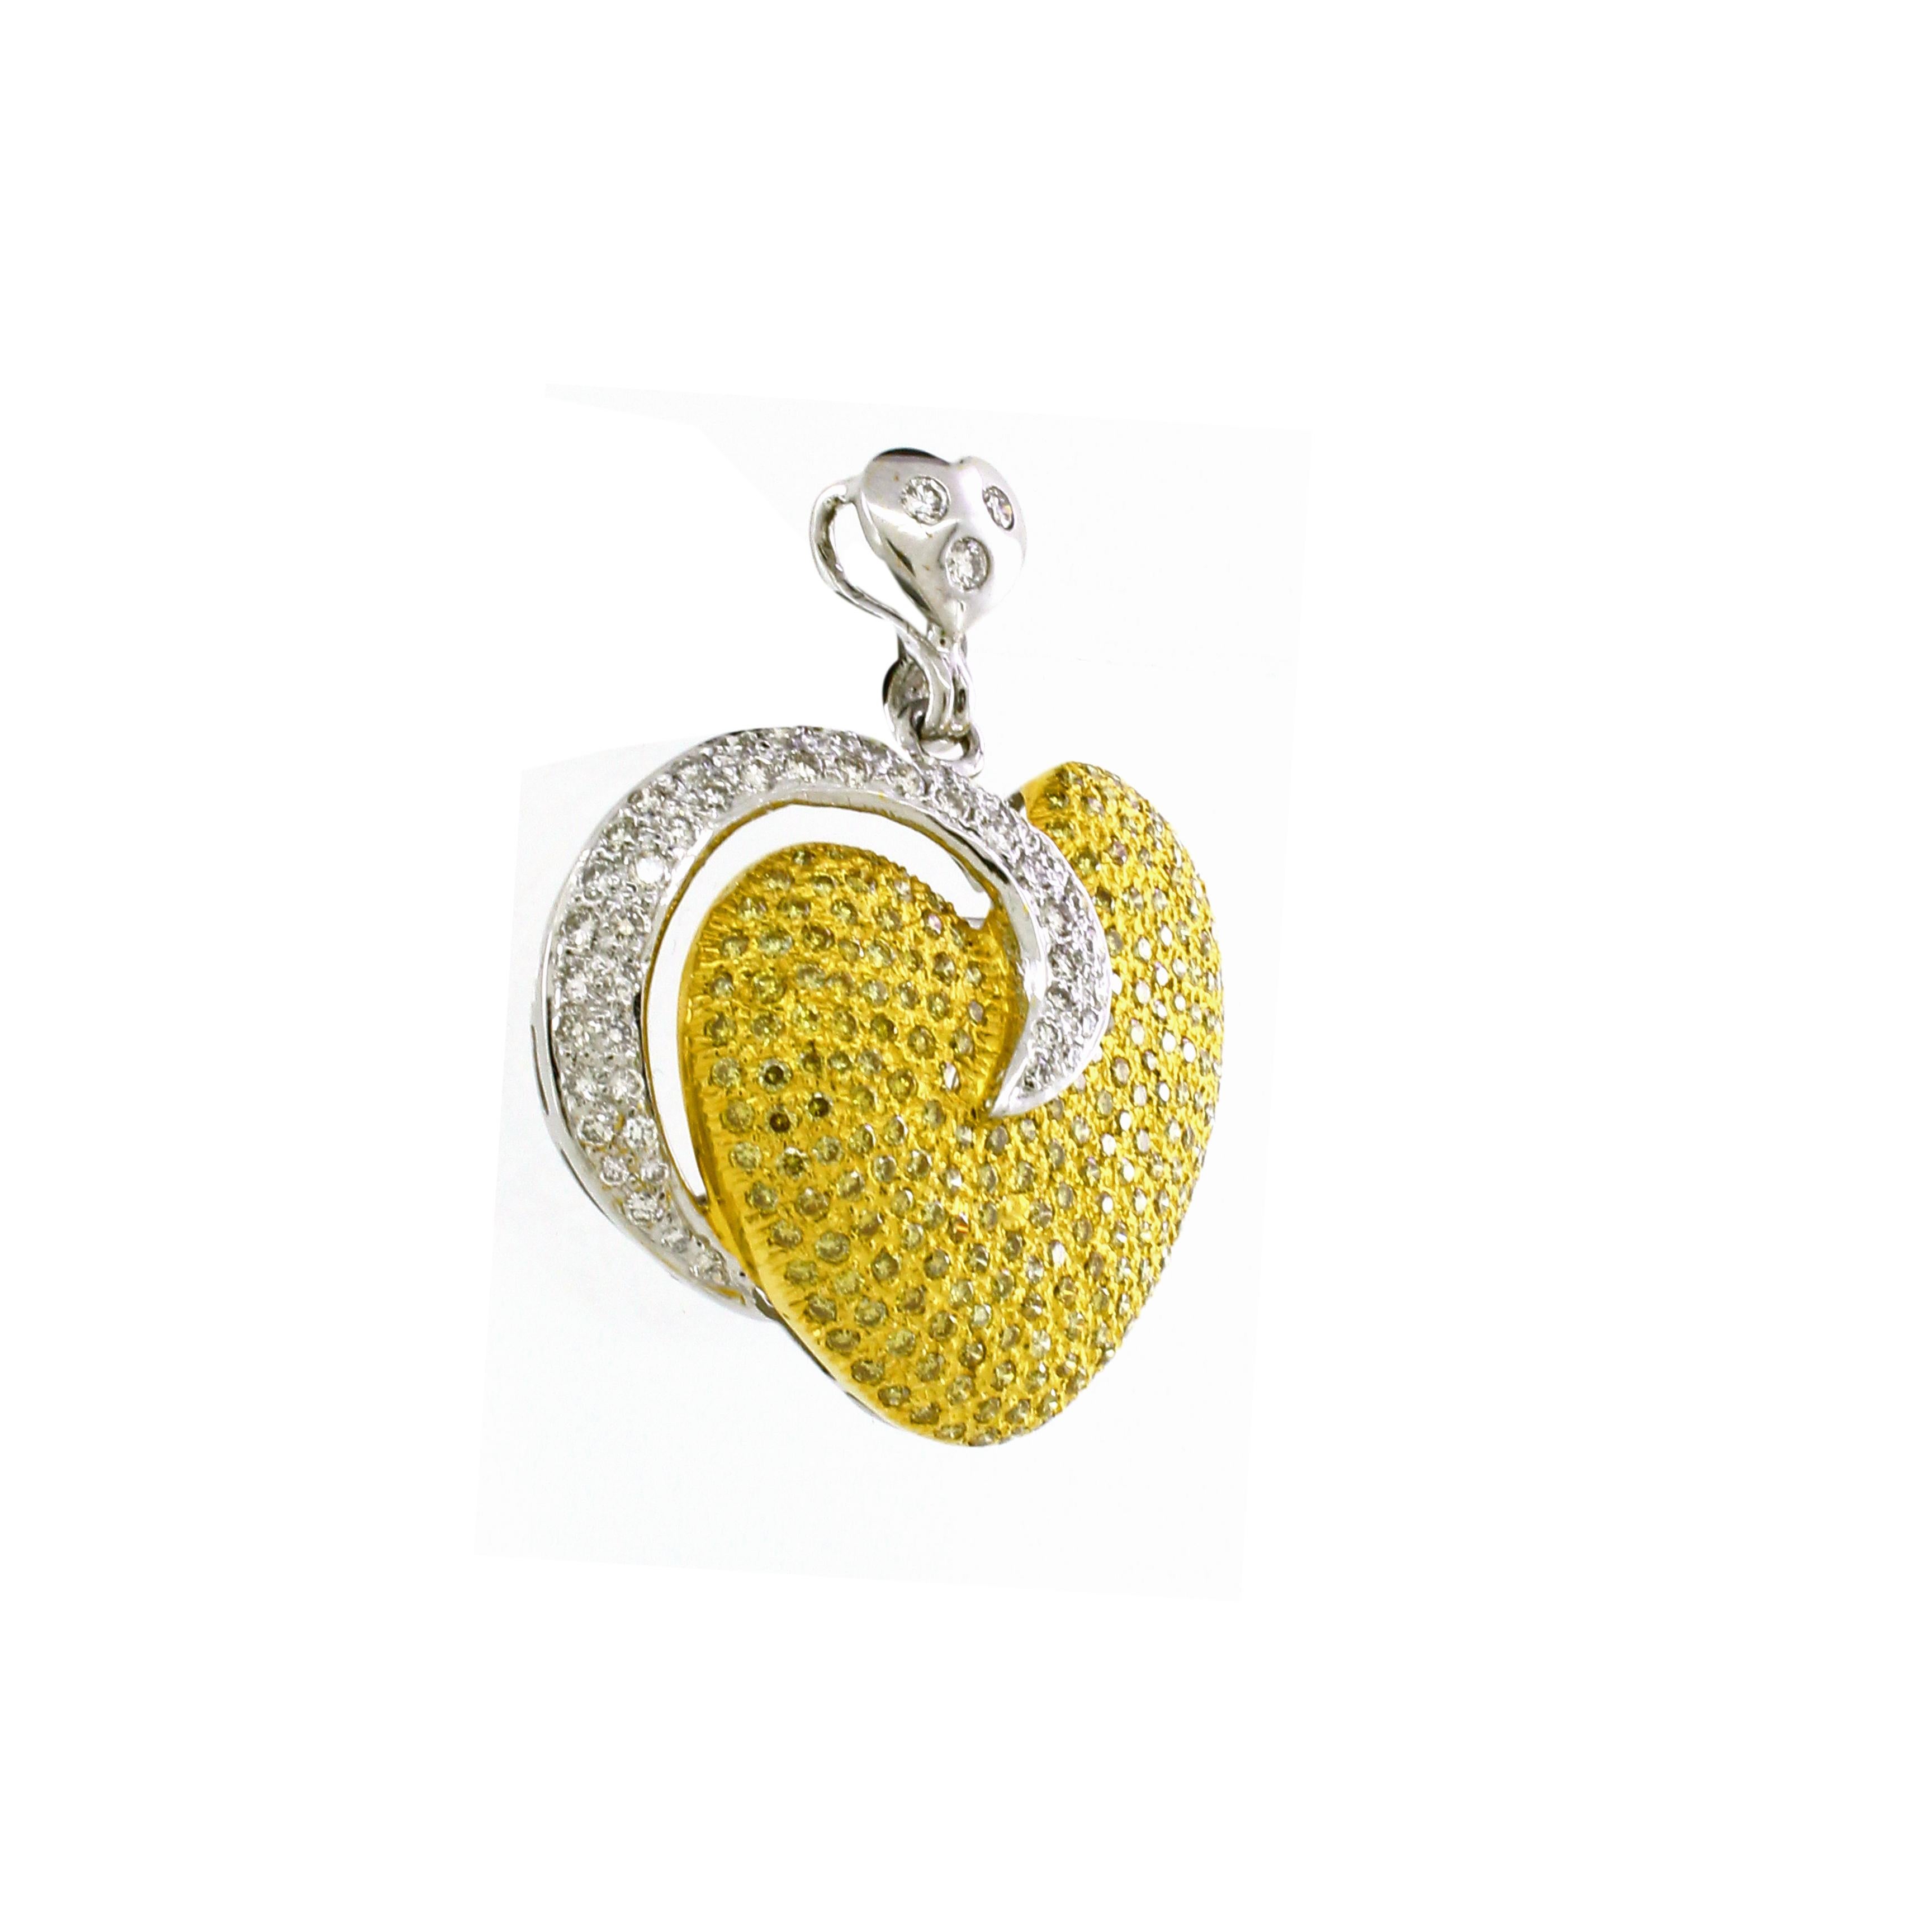 Radiating love and timeless elegance, this heart-shaped pendant is a breathtaking symbol of sophistication and beauty. Crafted with meticulous attention to detail, the pendant is fashioned from a harmonious blend of 18K yellow and white gold,